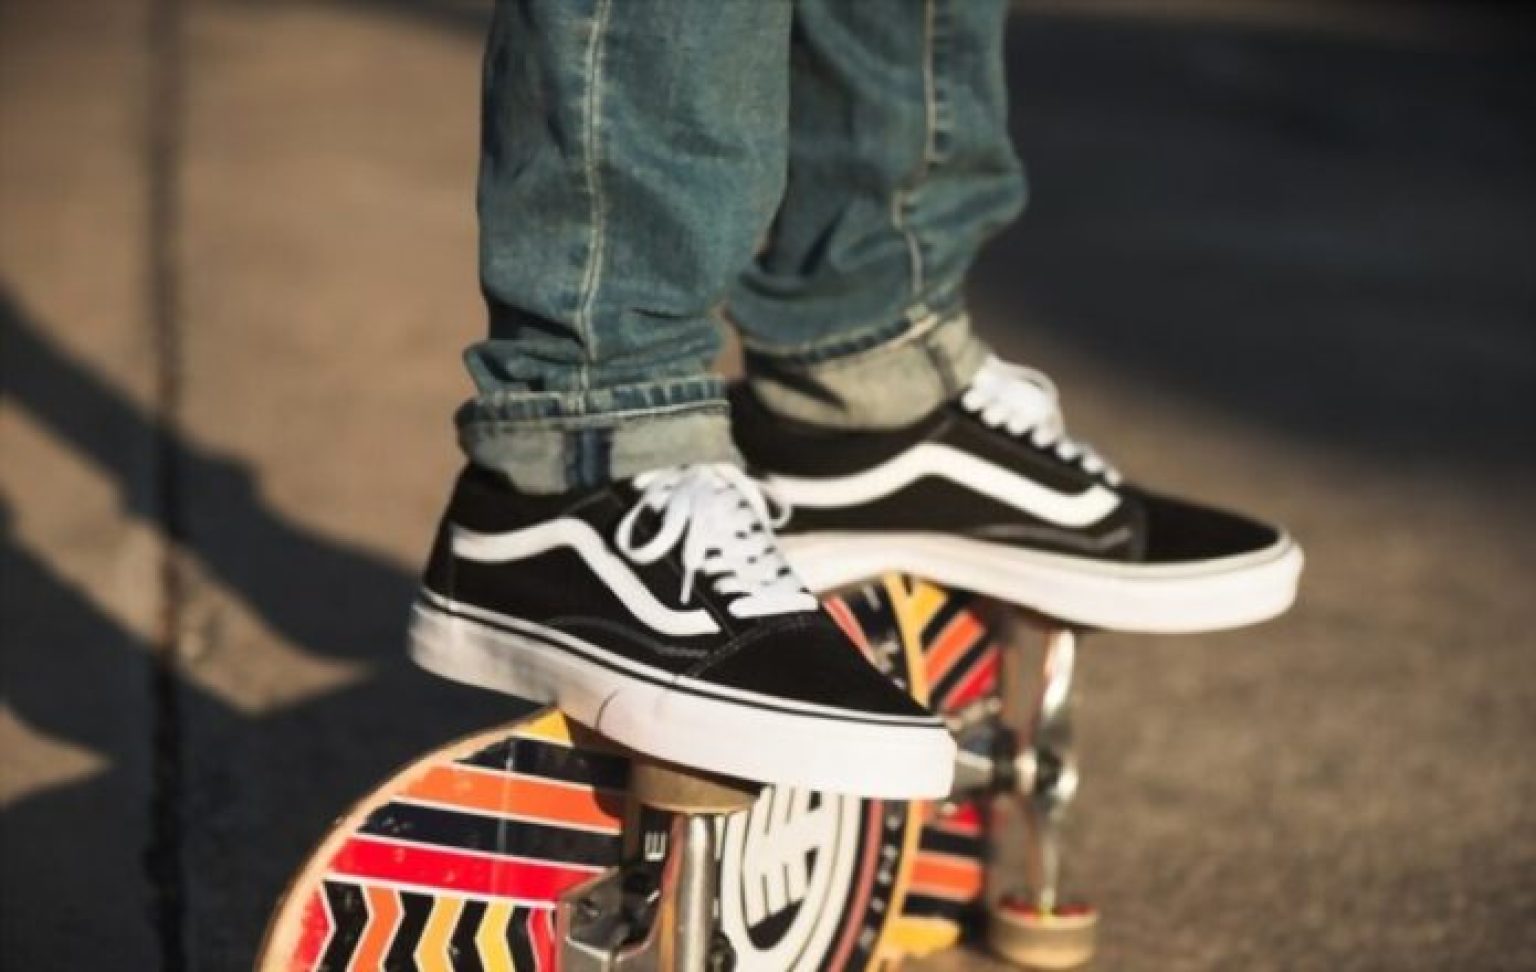 Vans Shoe Size Chart: How To Measure Your Size? - The Shoe Box NYC